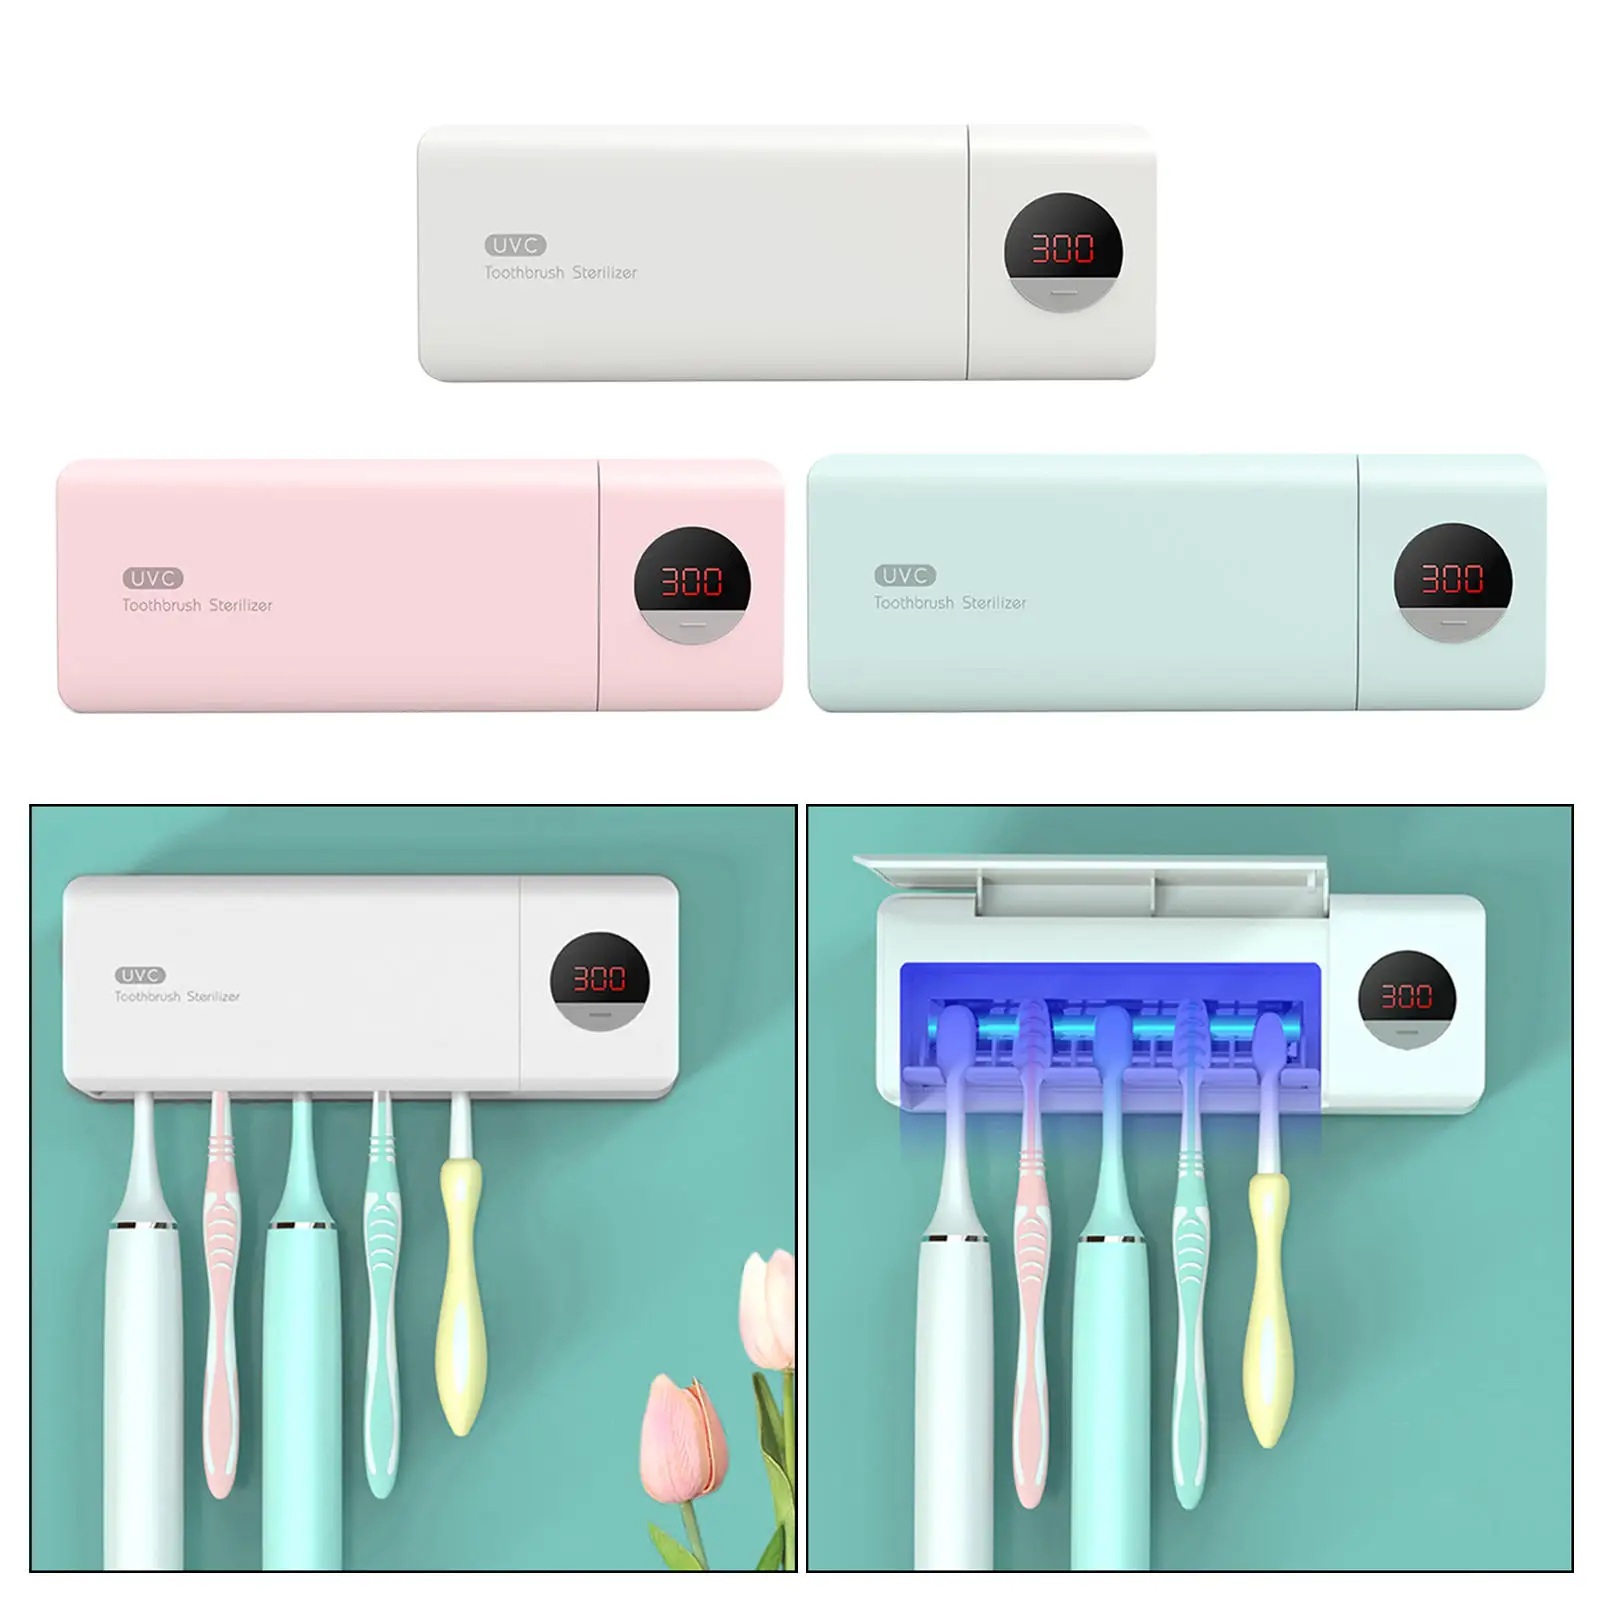 Smart Toothbrush Sanitizer UV Disinfection Bathroom Toothbrush Holder 5 Slots Drilling-Free Rechargeable Sterilizer Organizer